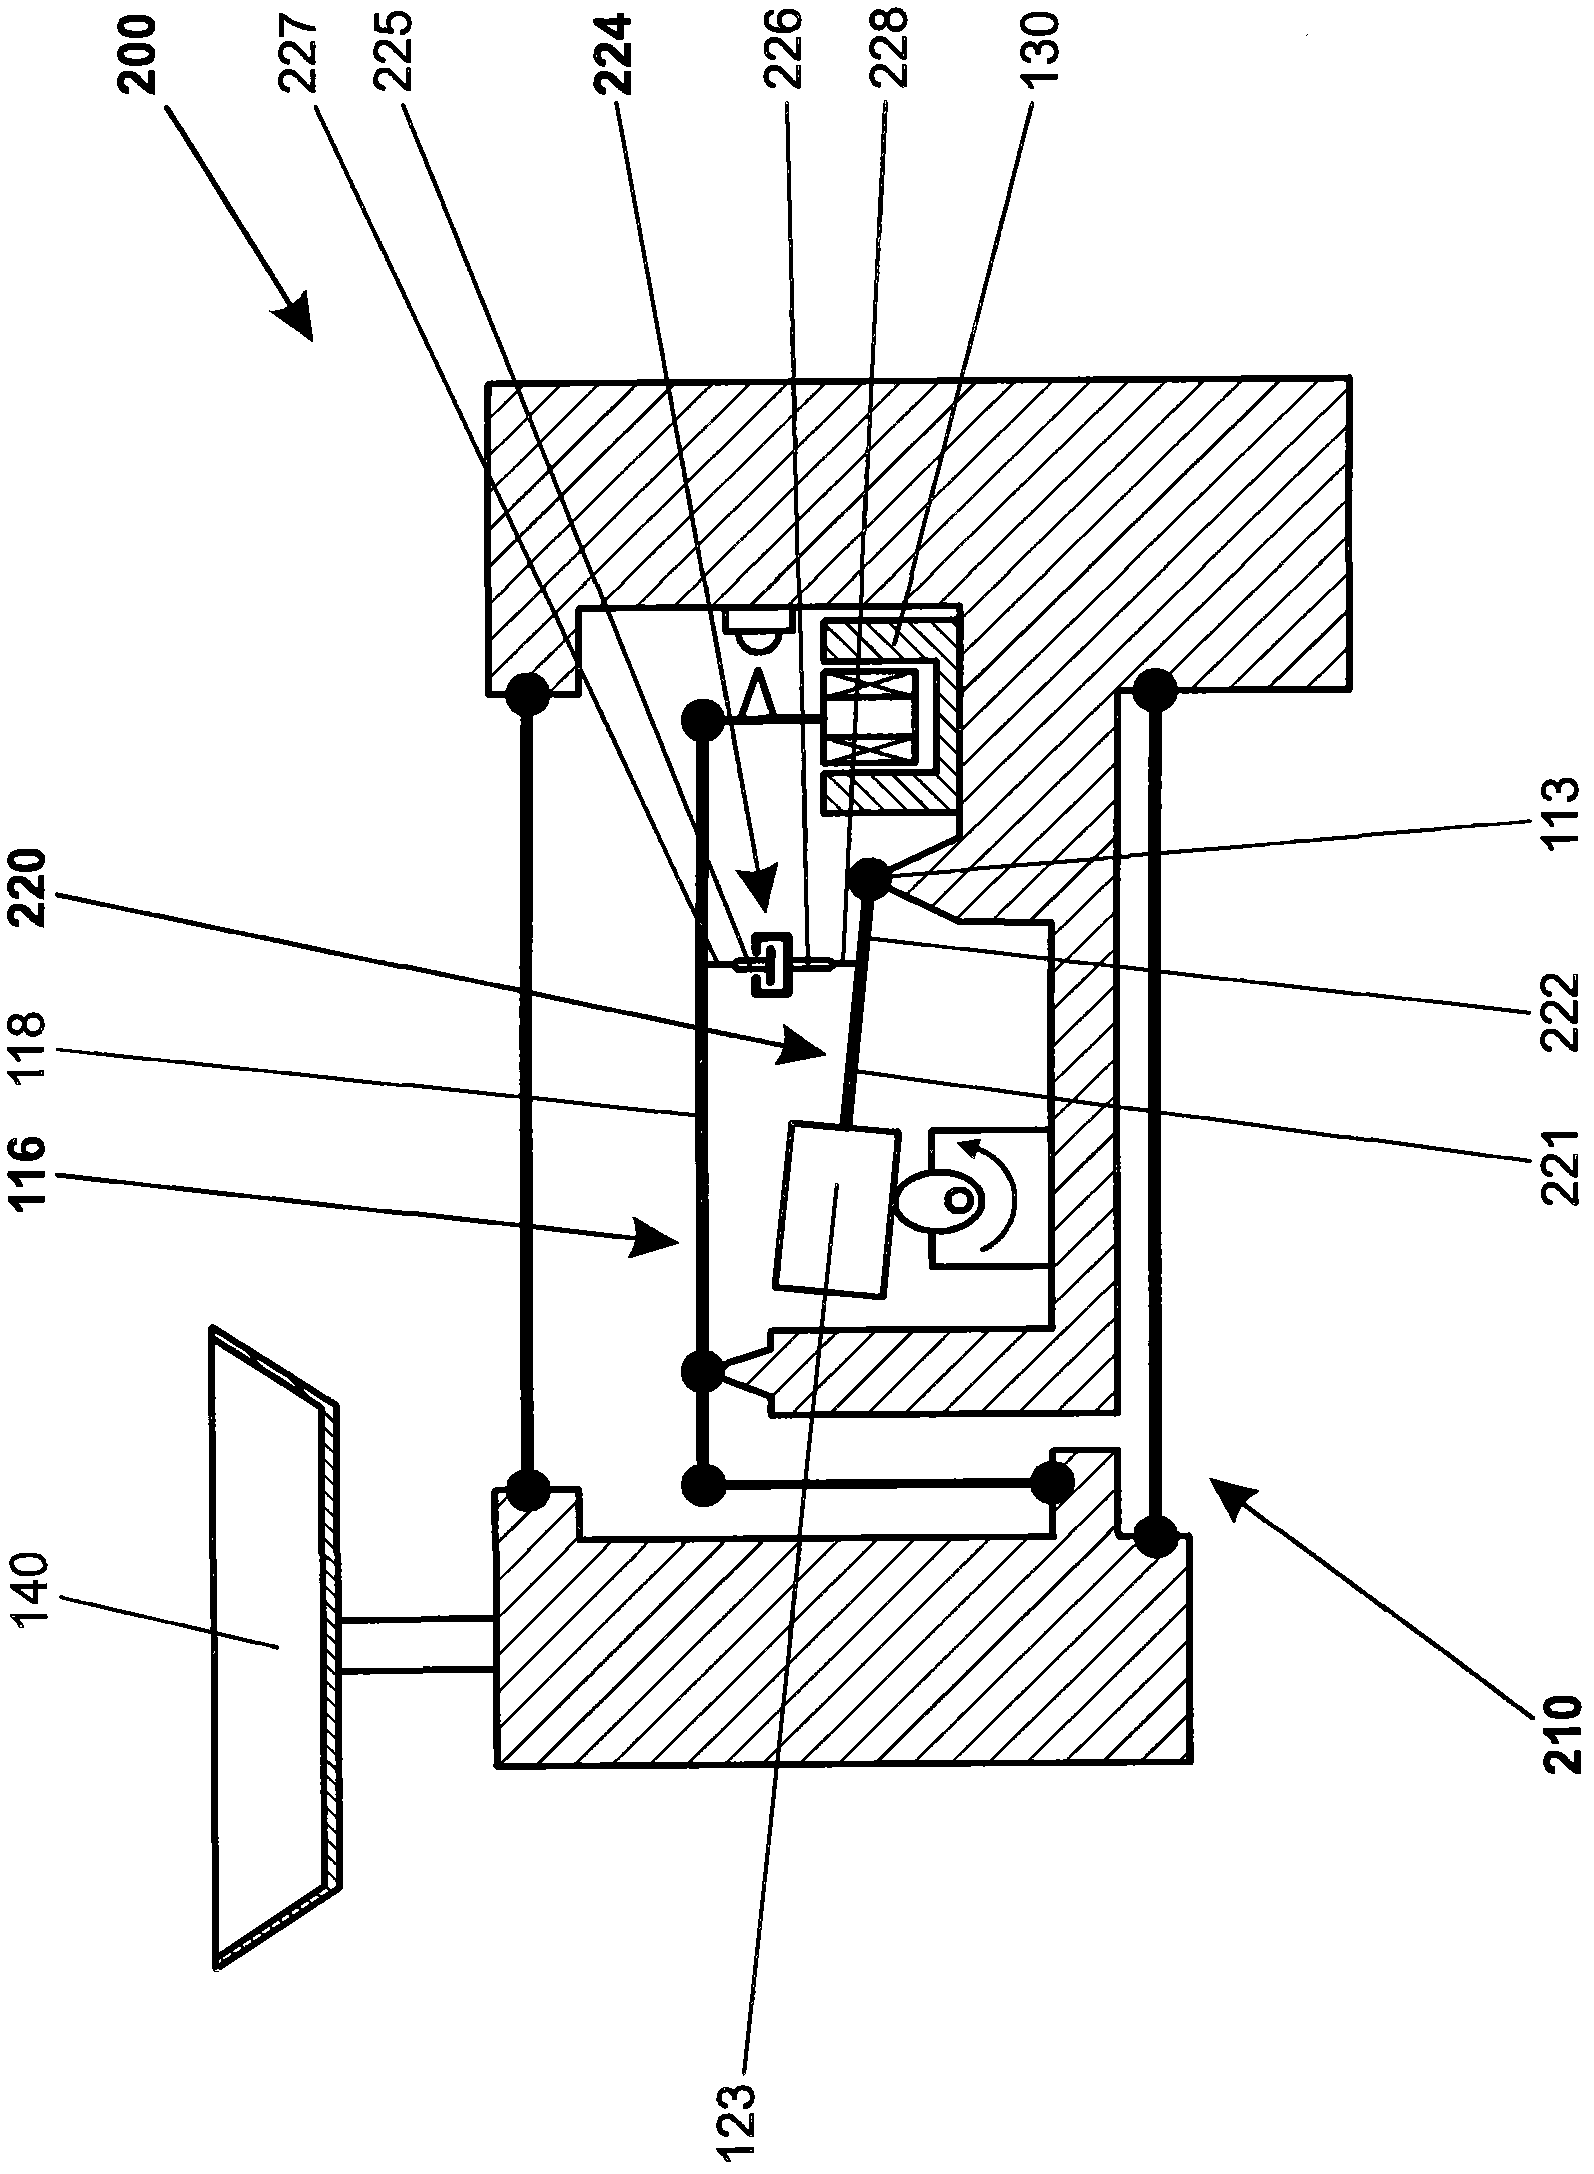 Force-transmitting device with a calibration weight that can be coupled and uncoupled